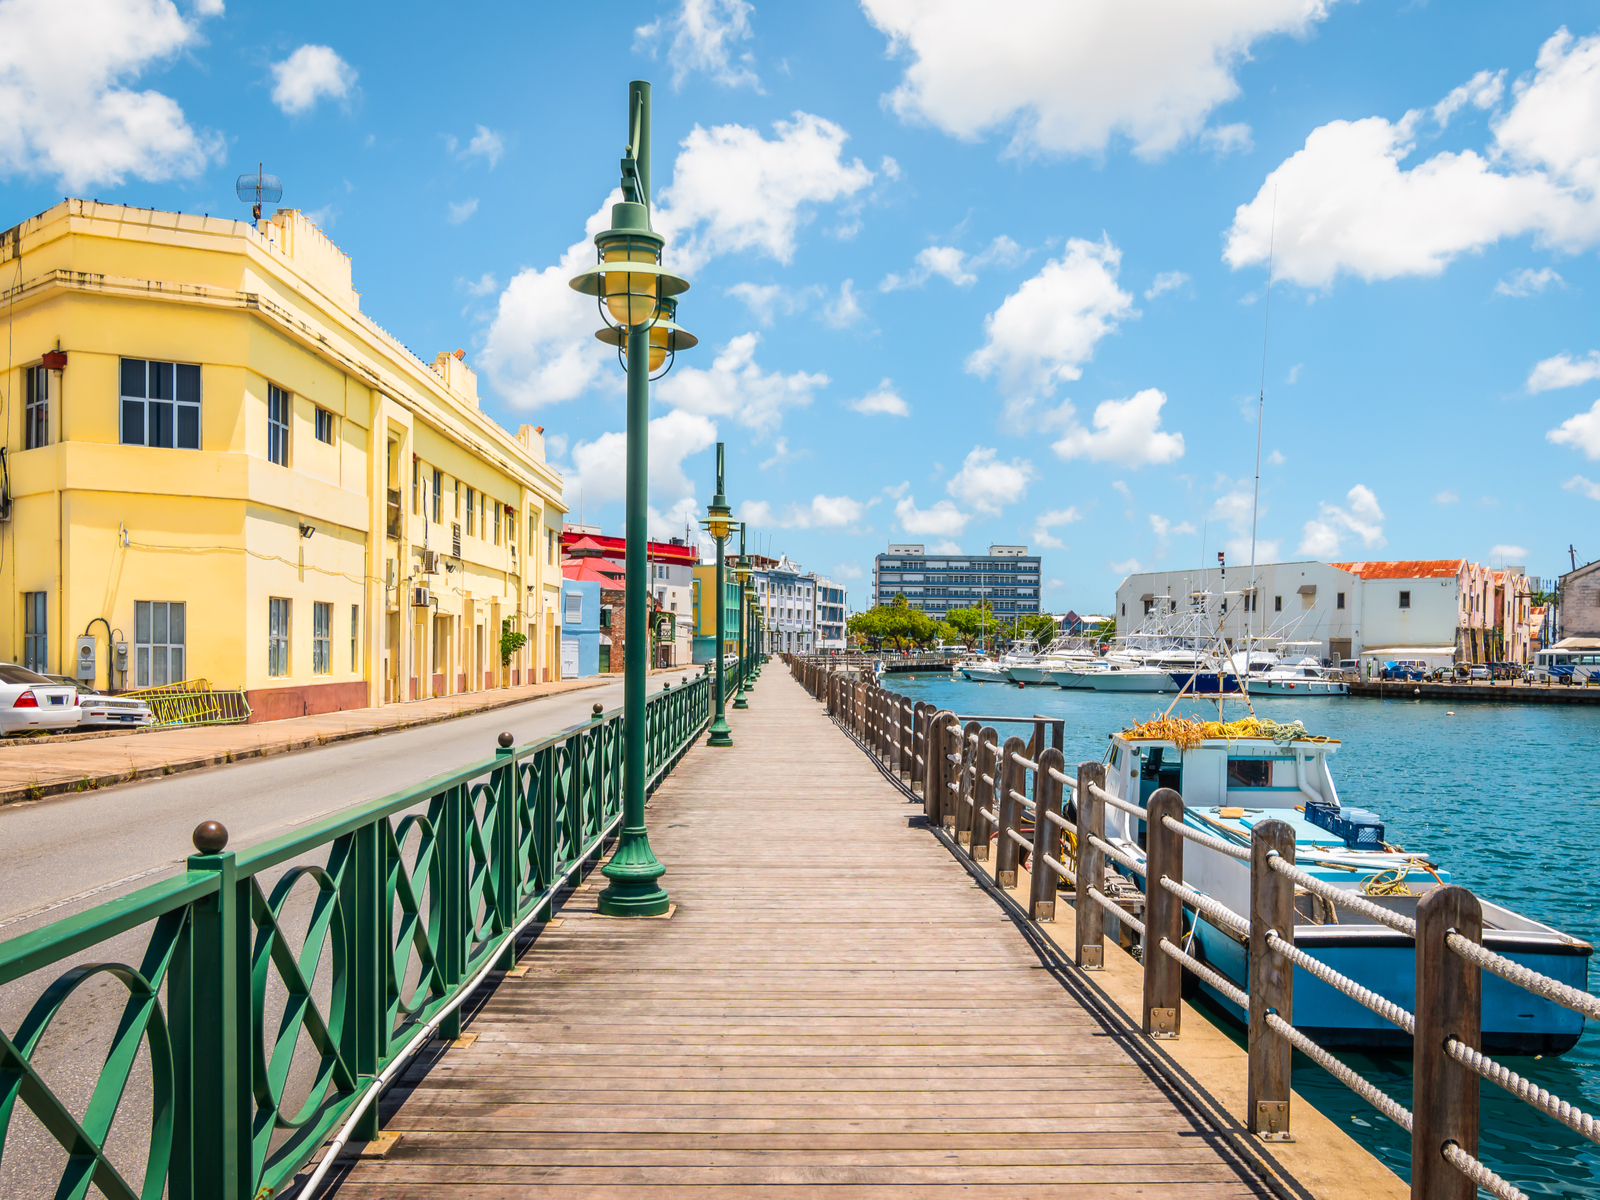 Promenade at marina of Bridgetown, Barbados, one of the safest islands in the Caribbean